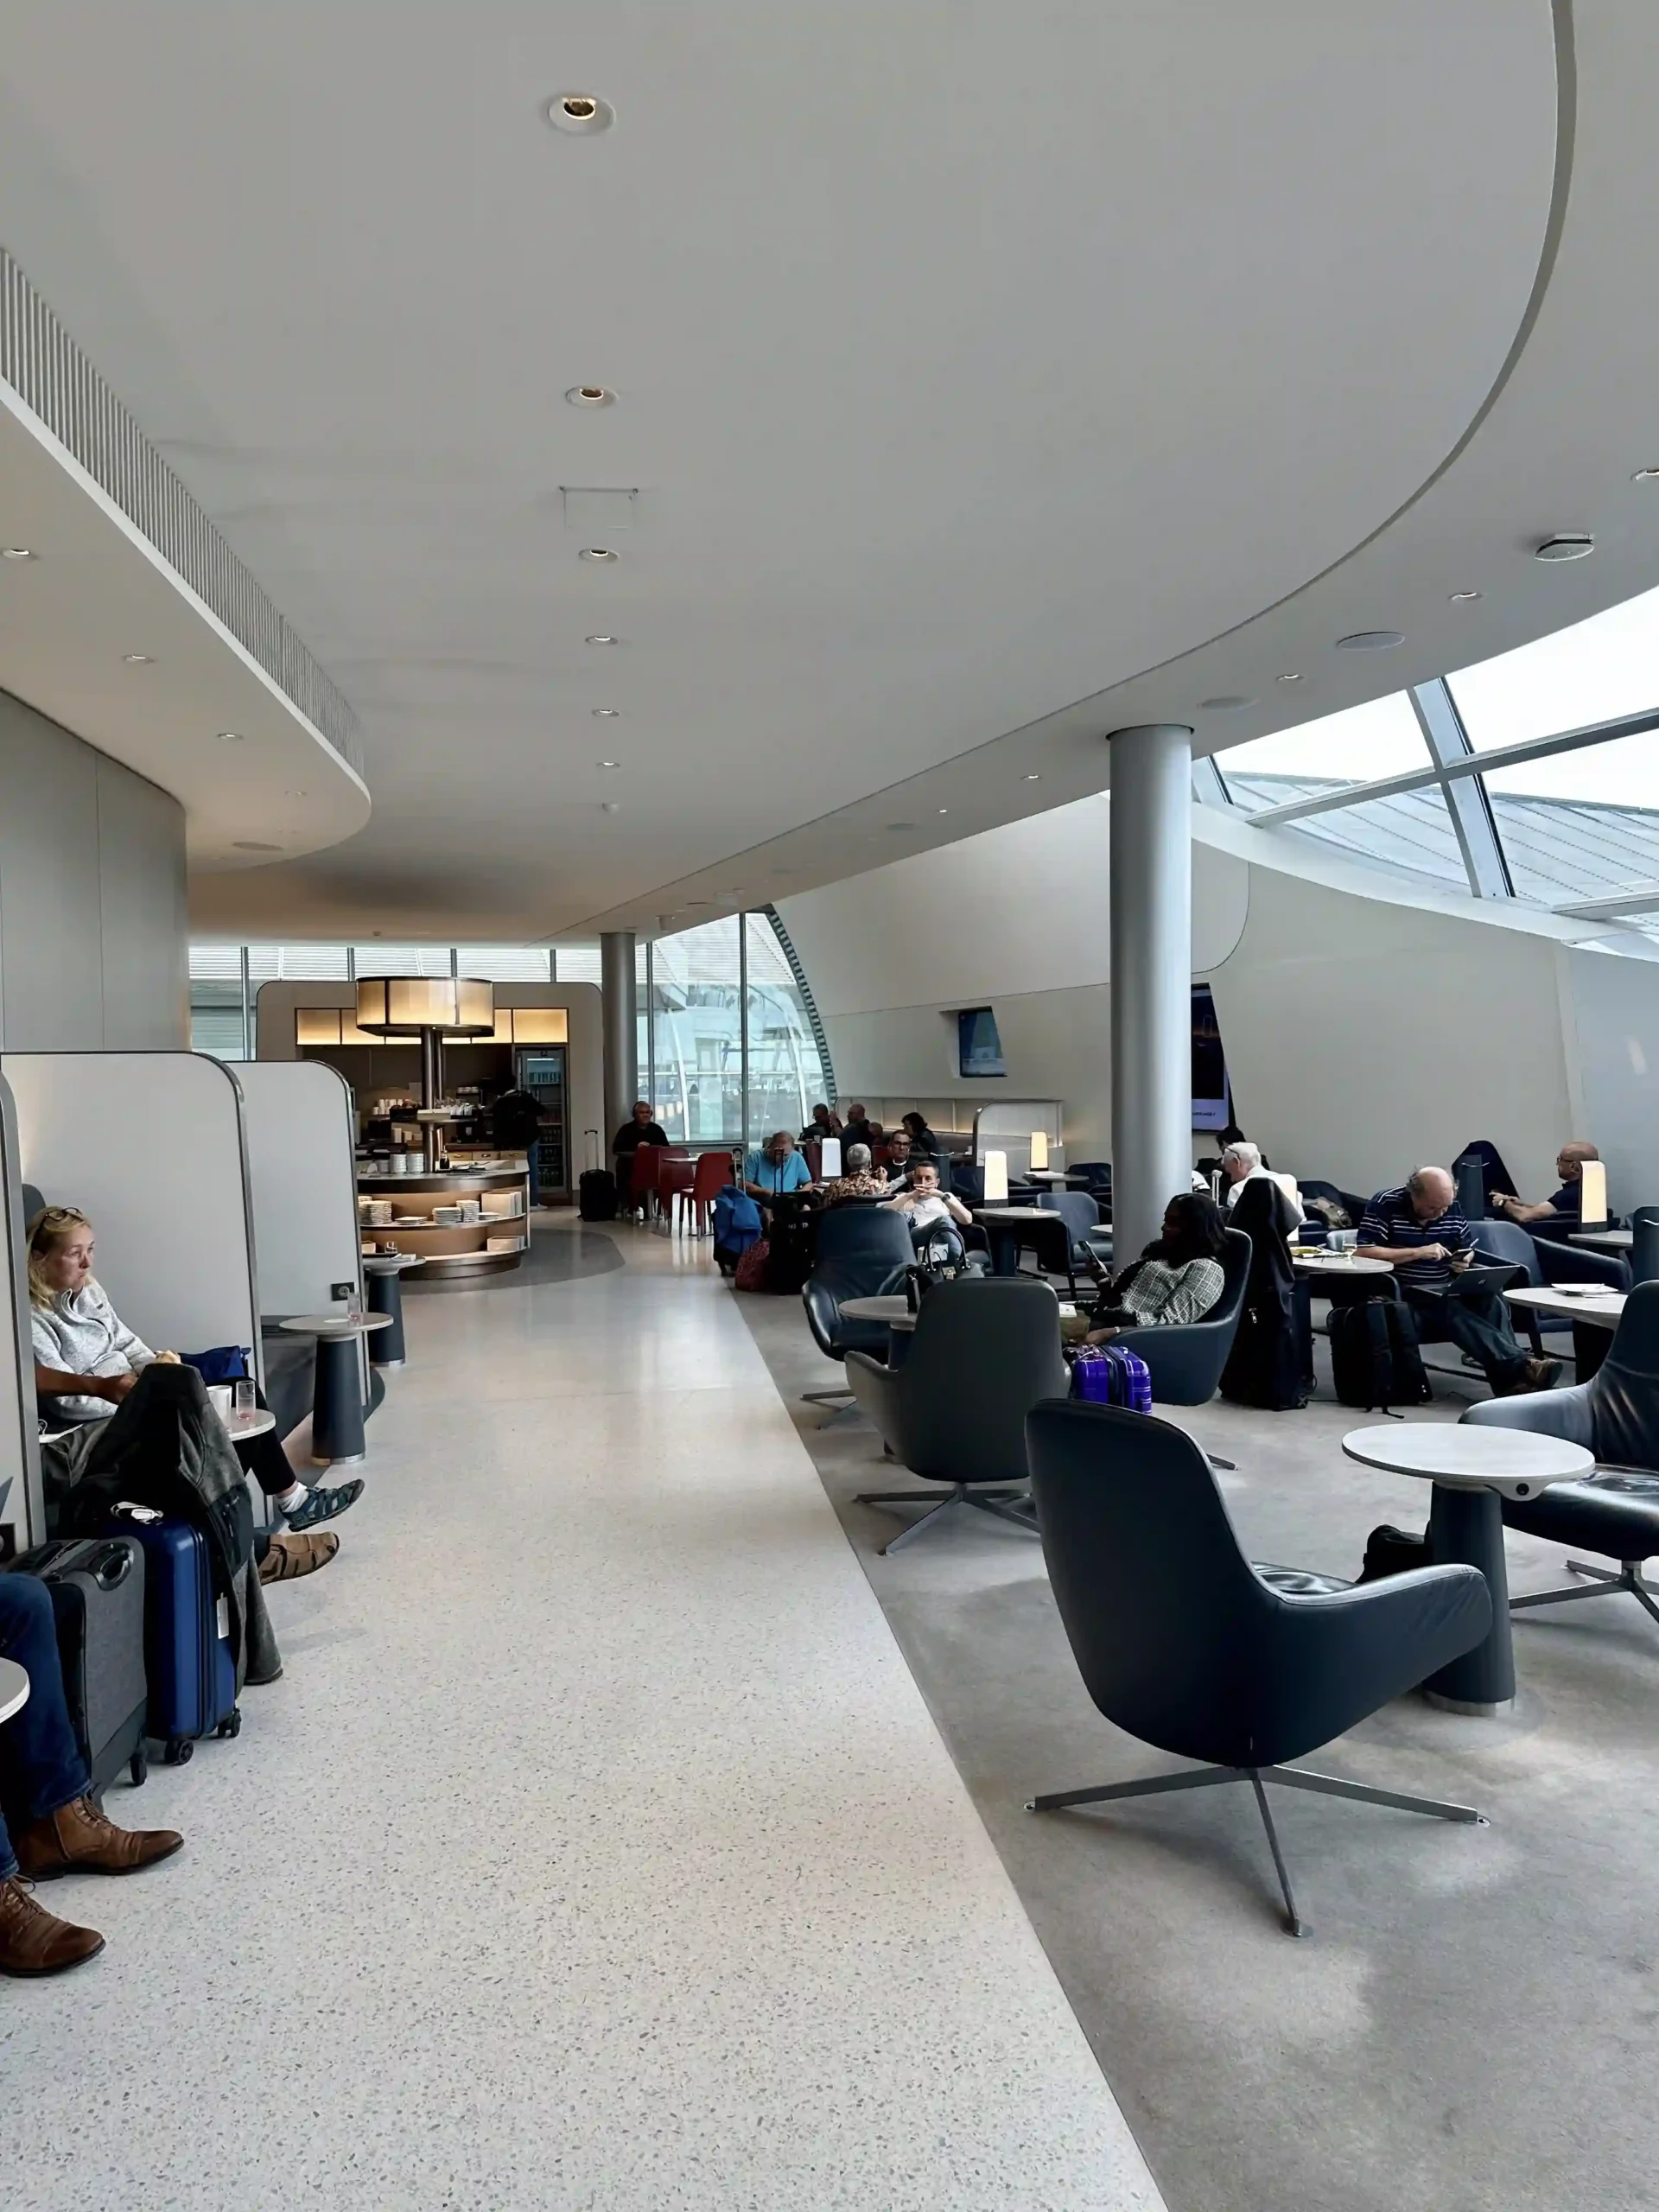 people sitting in a lounge area with chairs and tables